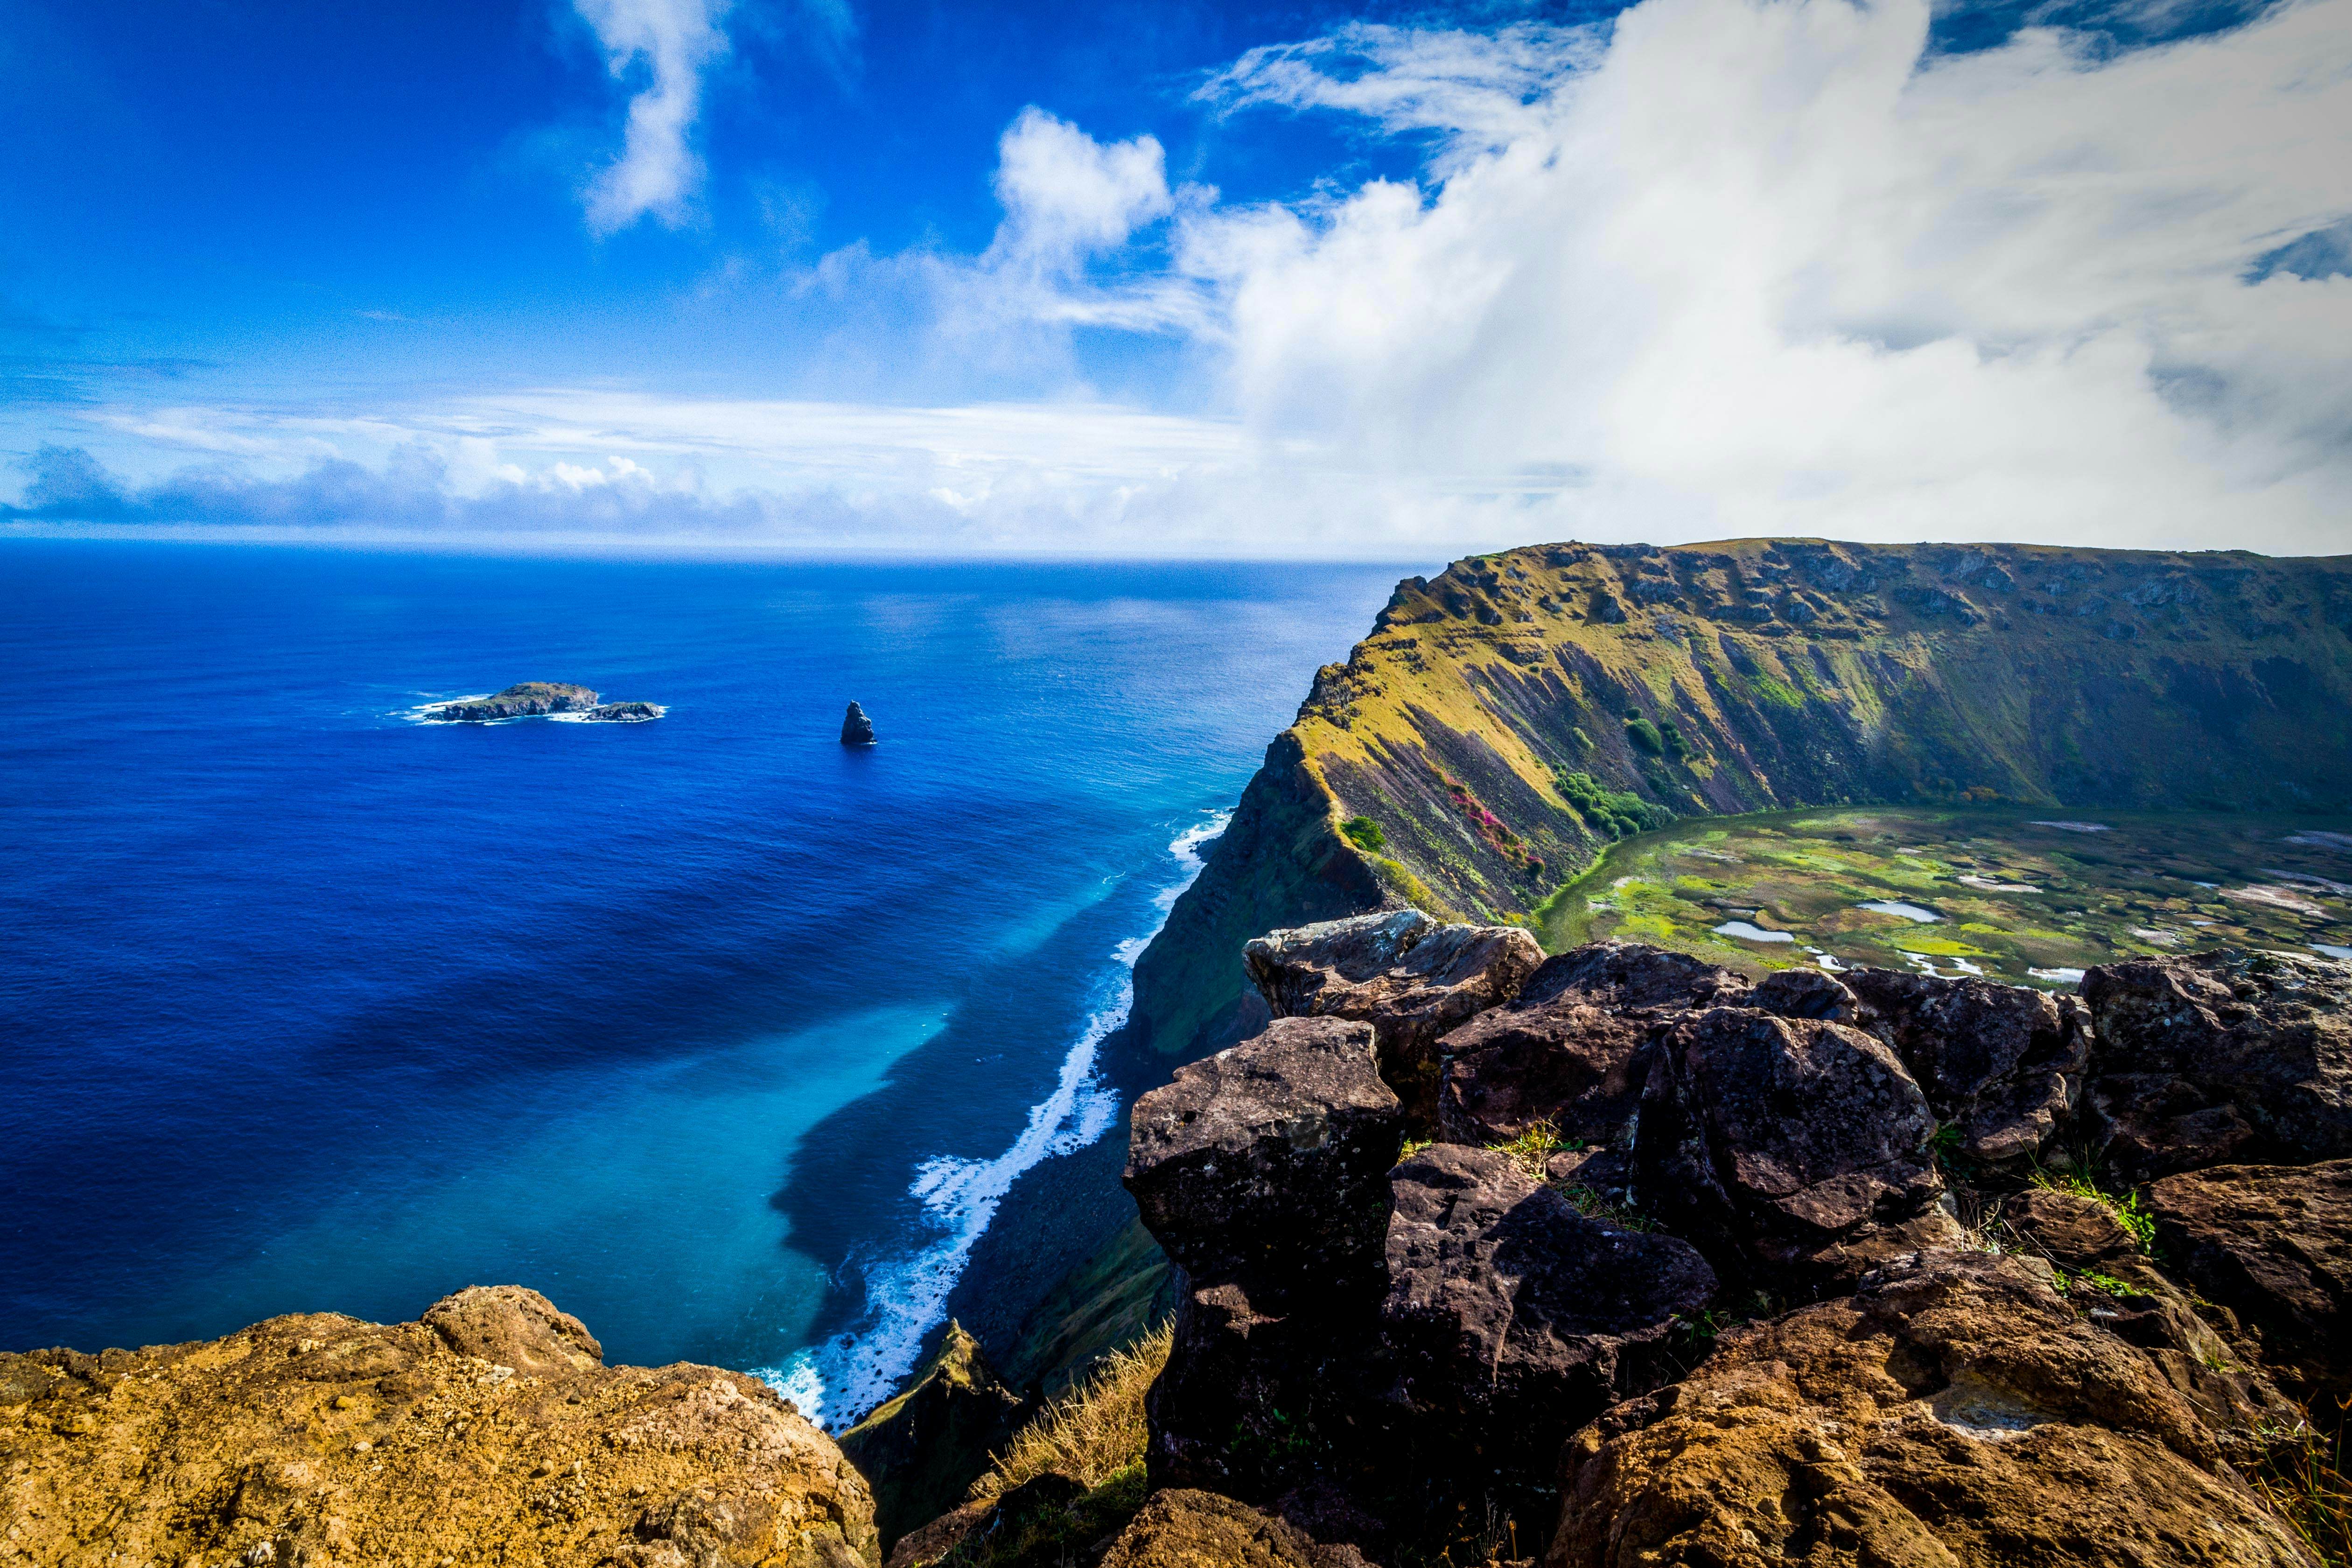 Gladys loft Udråbstegn Easter Island (Rapa Nui) travel | Chile, South America - Lonely Planet